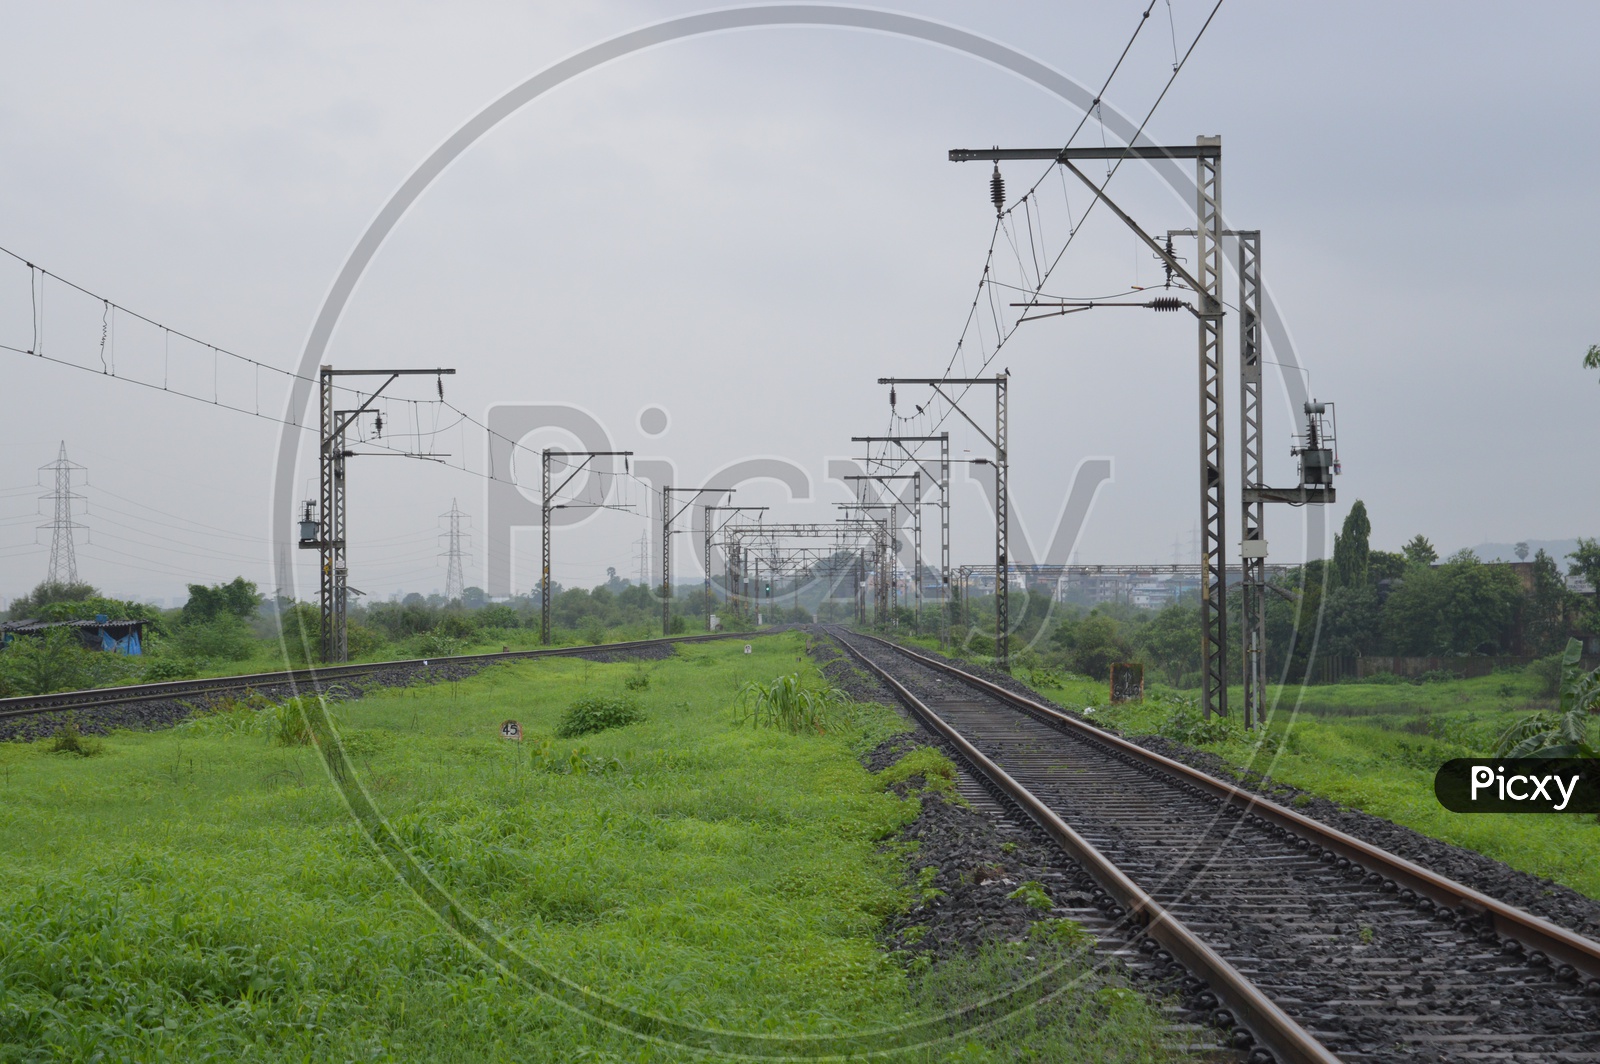 railway track with electricity lines